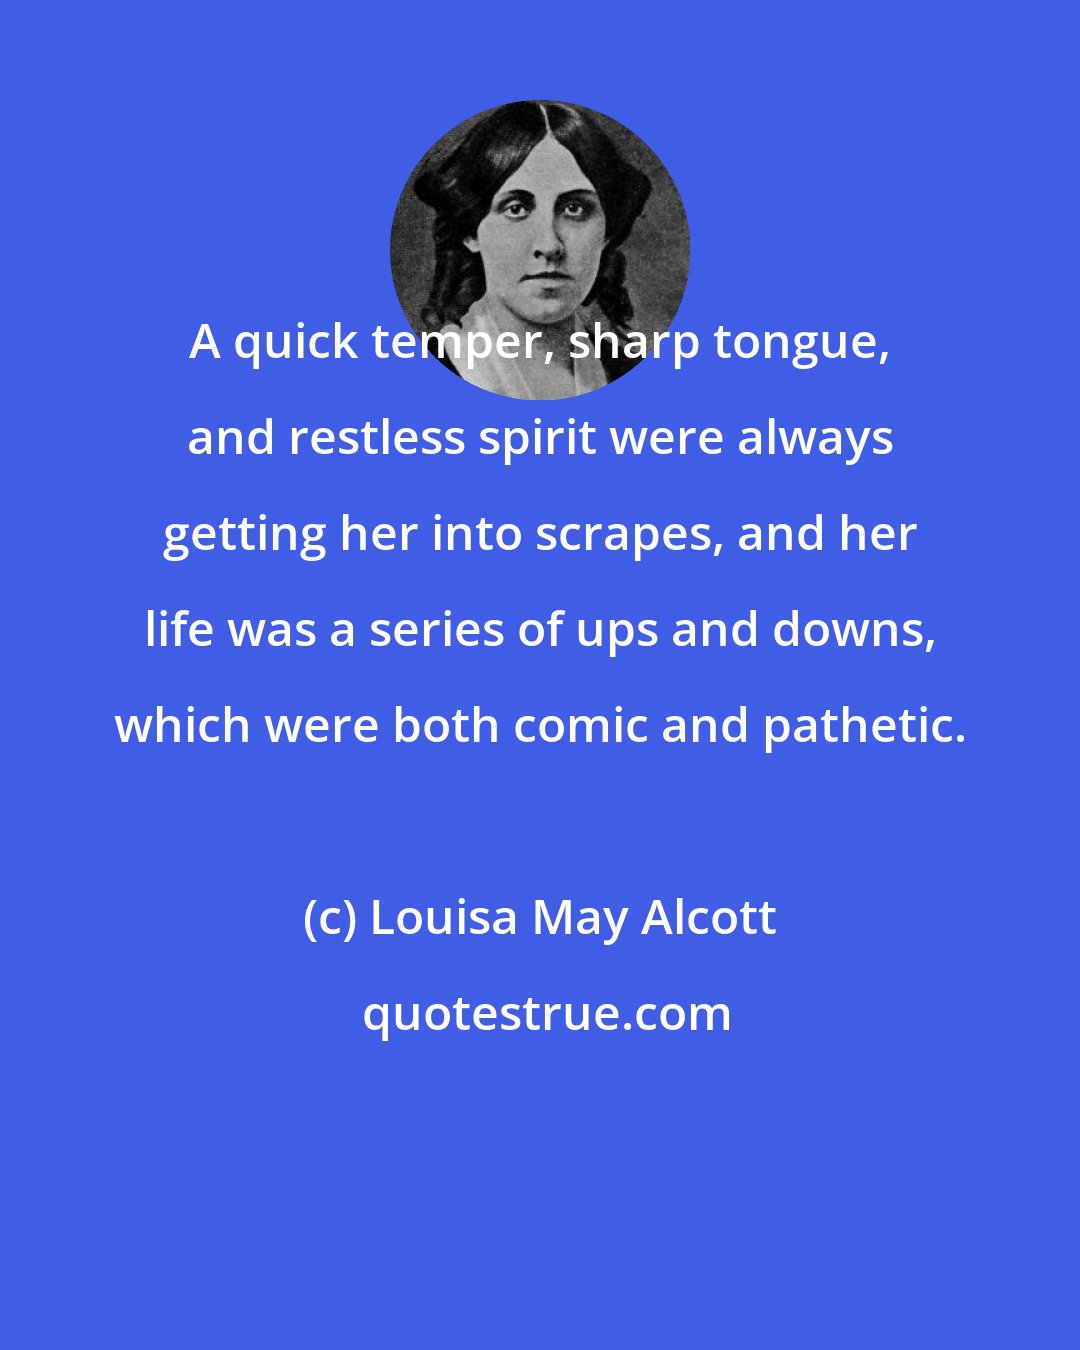 Louisa May Alcott: A quick temper, sharp tongue, and restless spirit were always getting her into scrapes, and her life was a series of ups and downs, which were both comic and pathetic.